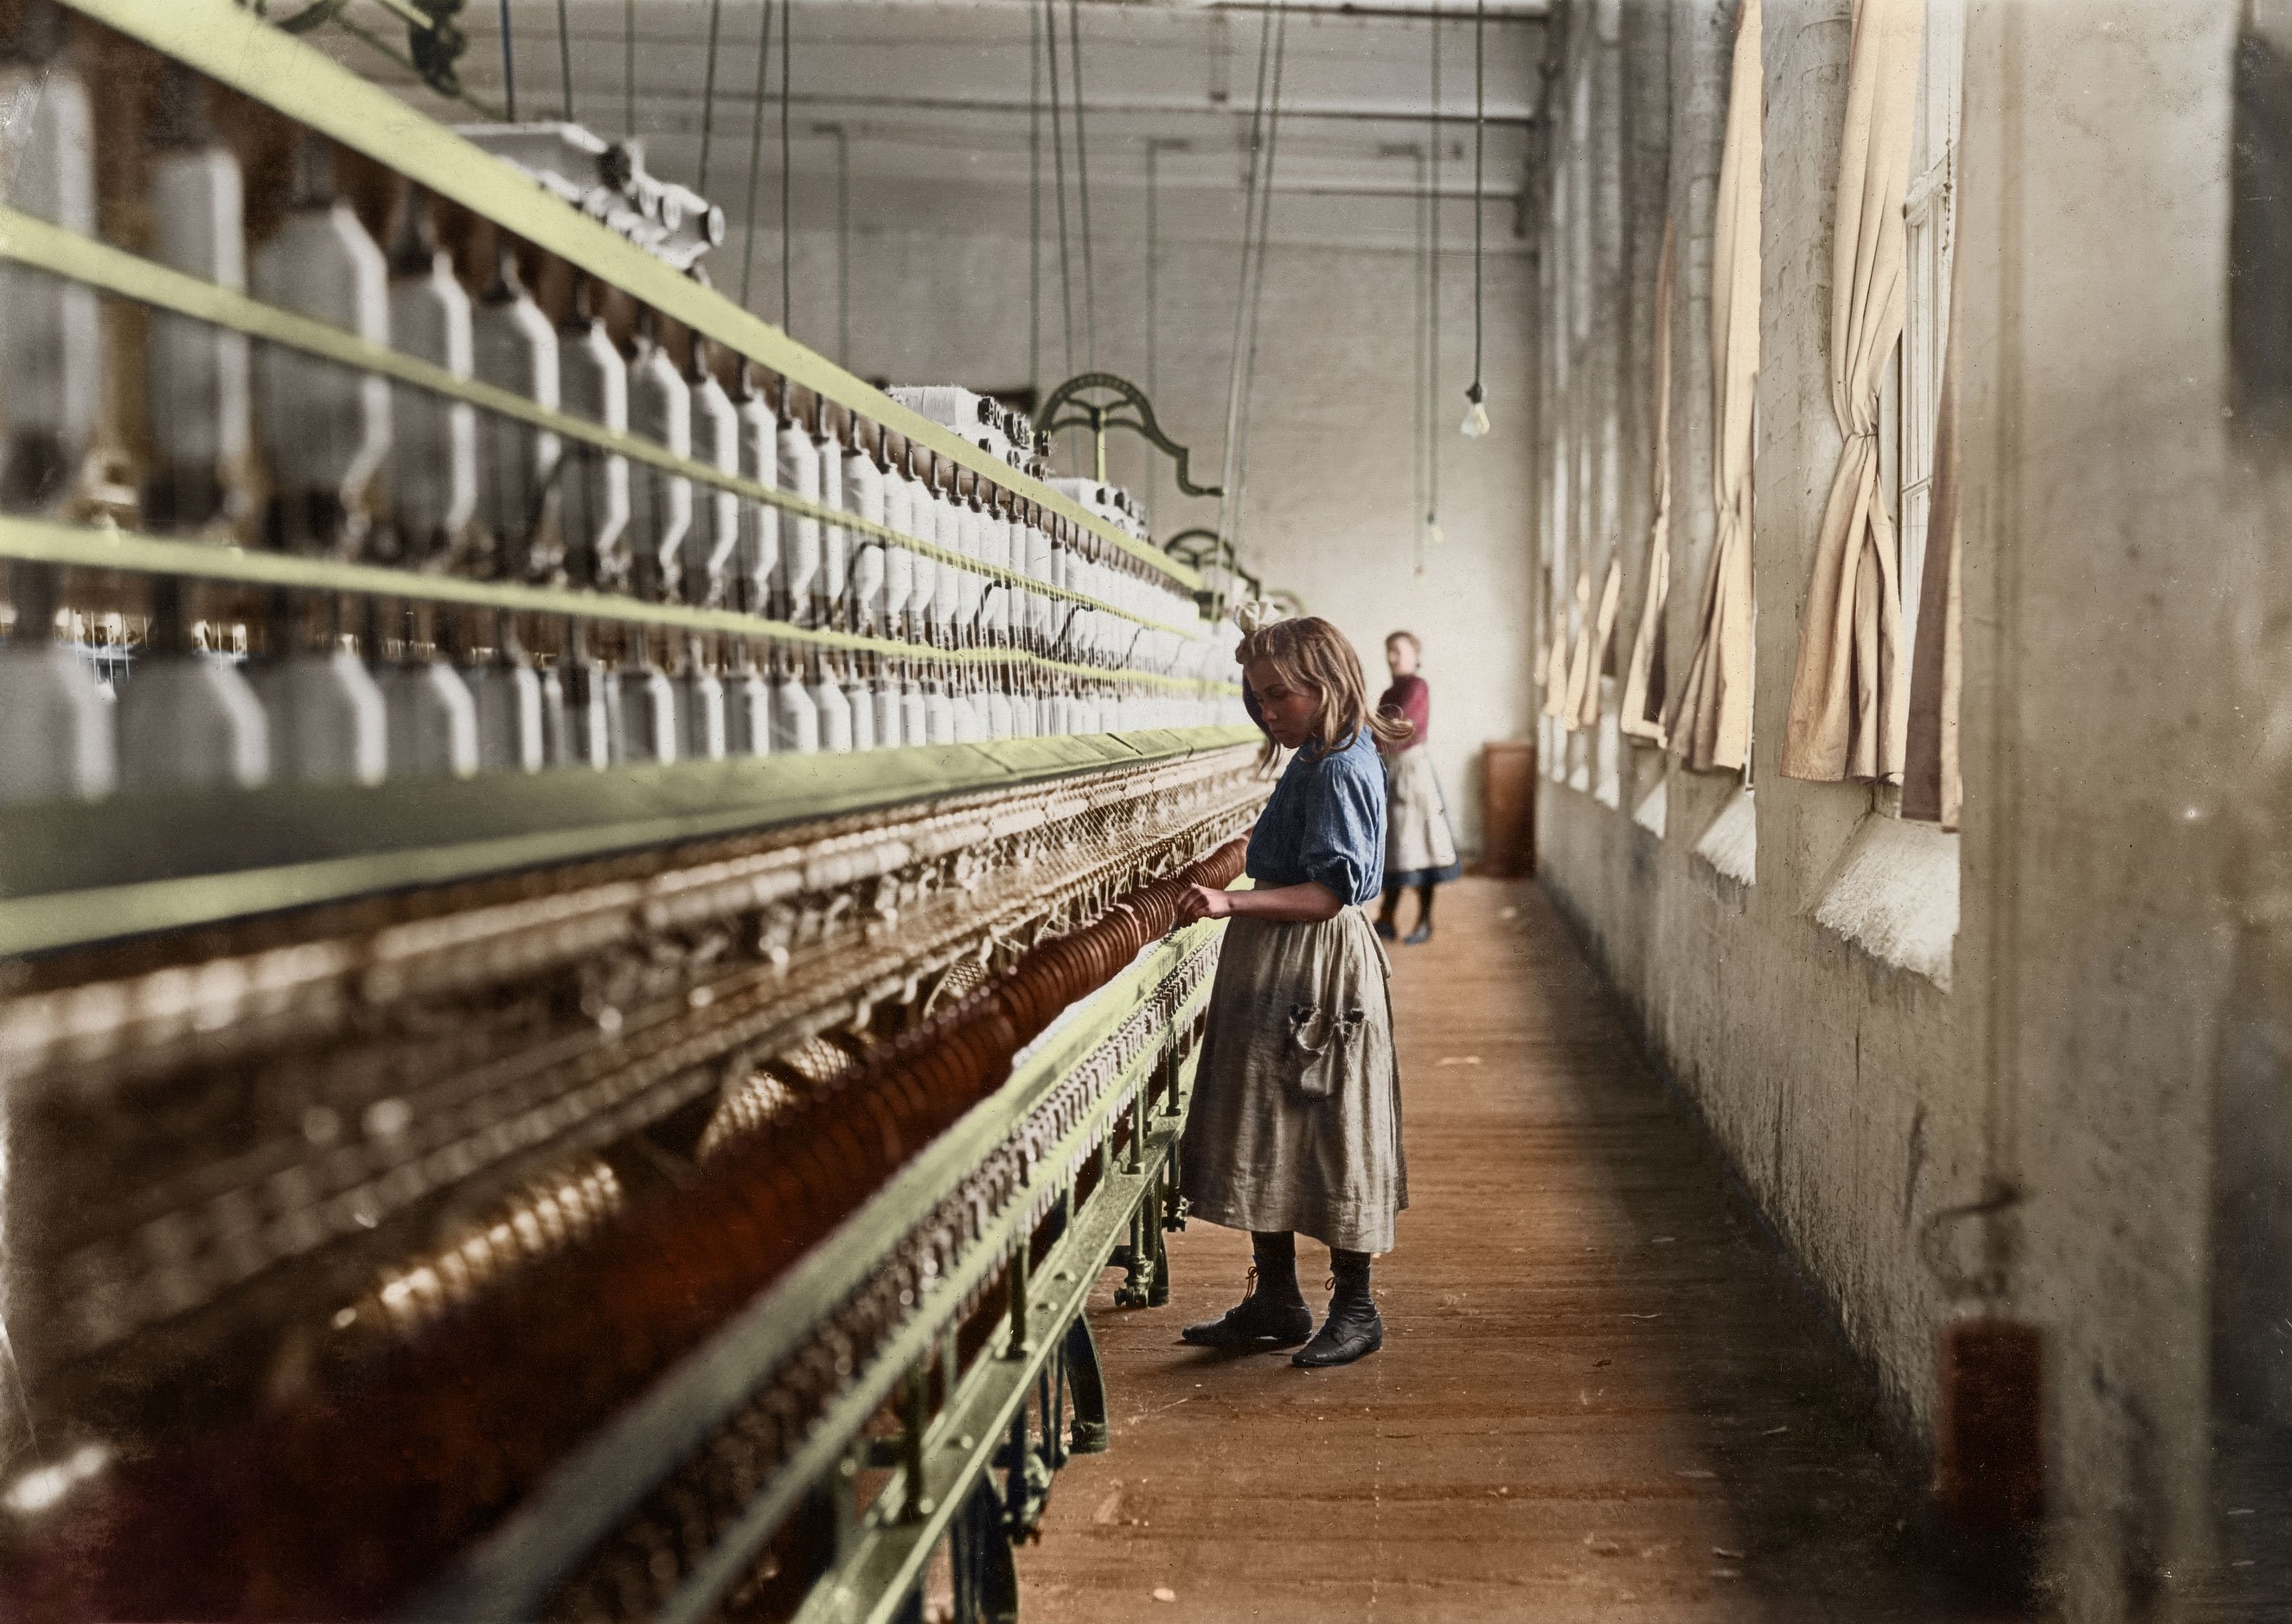 Child Labor: See Lewis Hine's Photos Colorized | Time.com